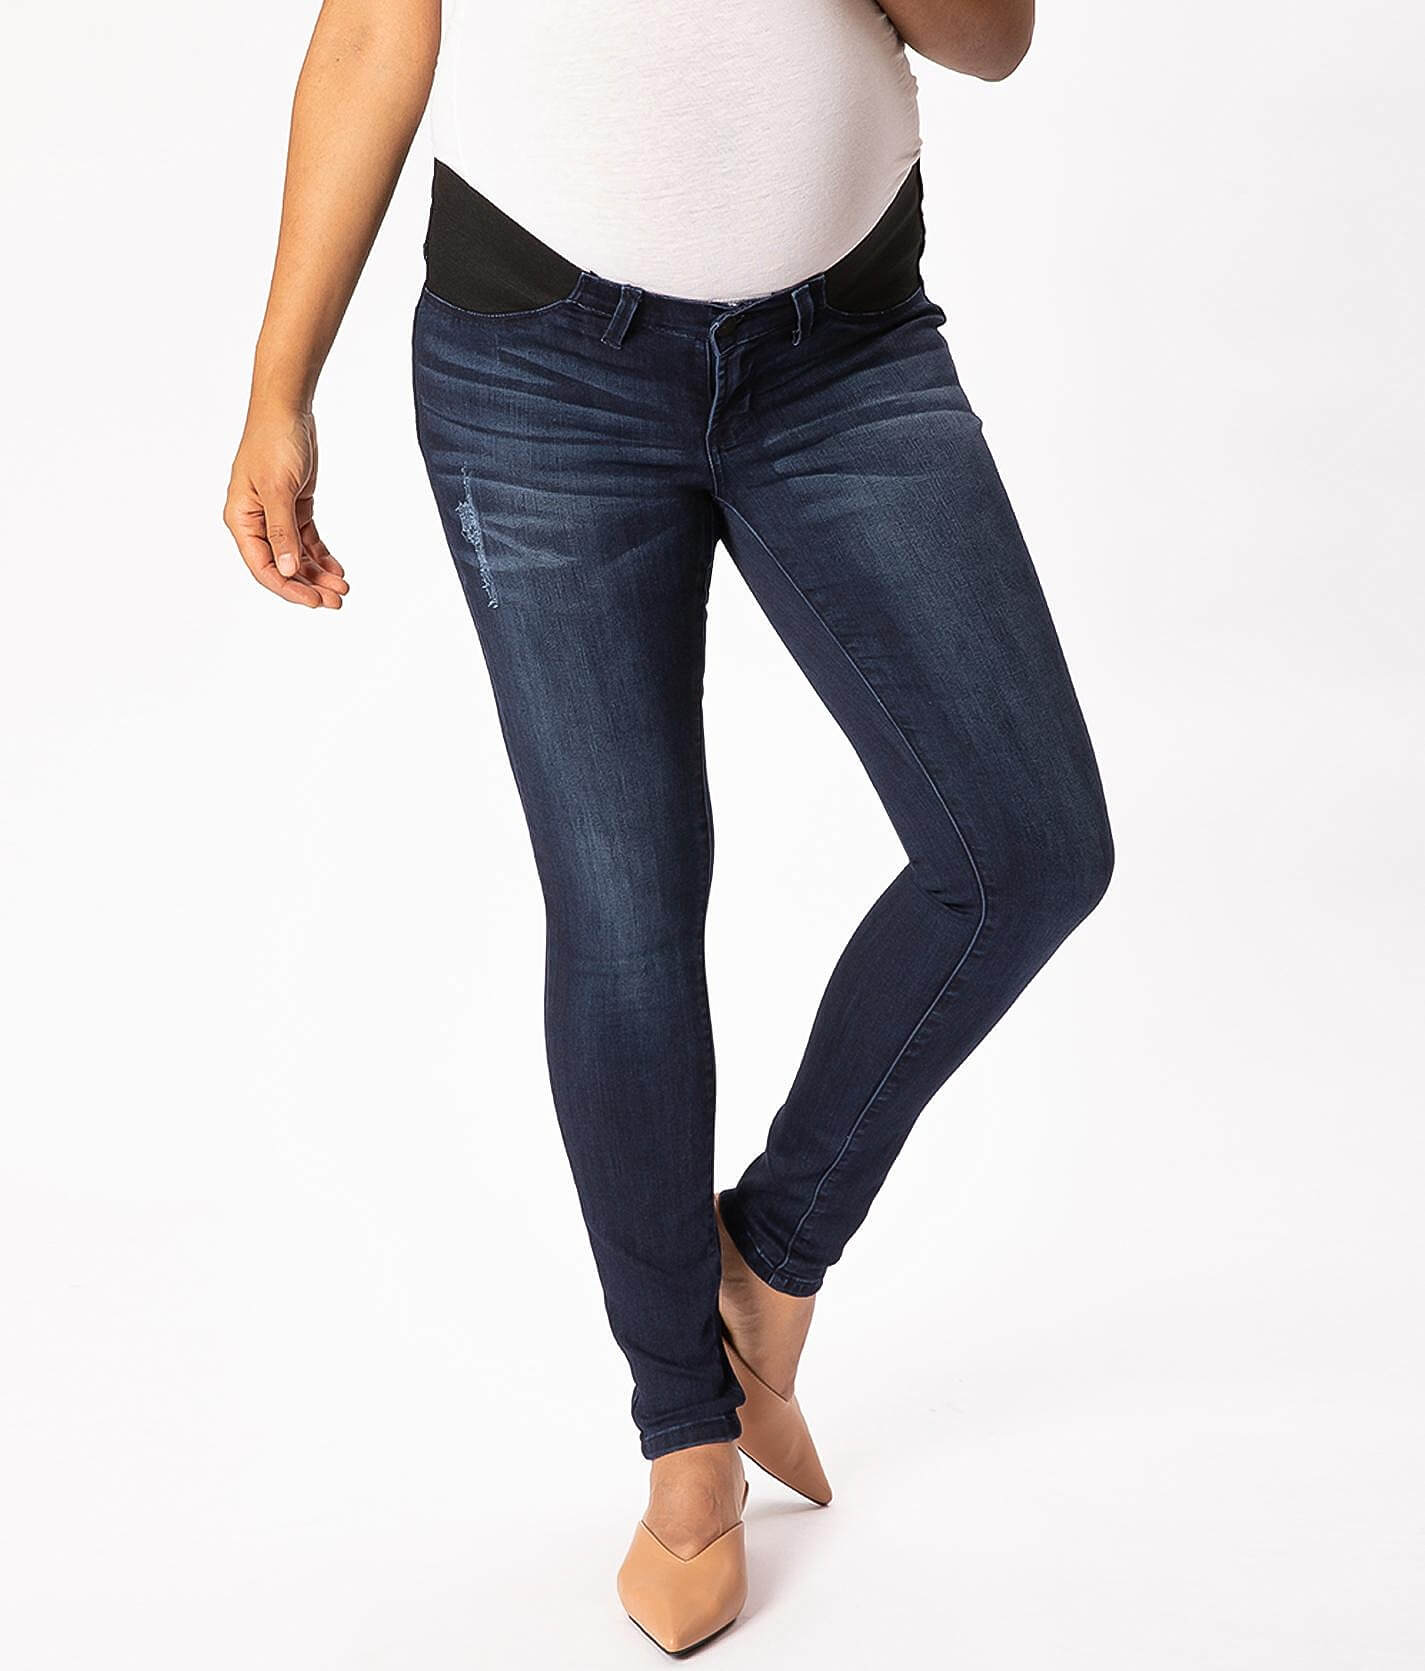 kancan jeans canada